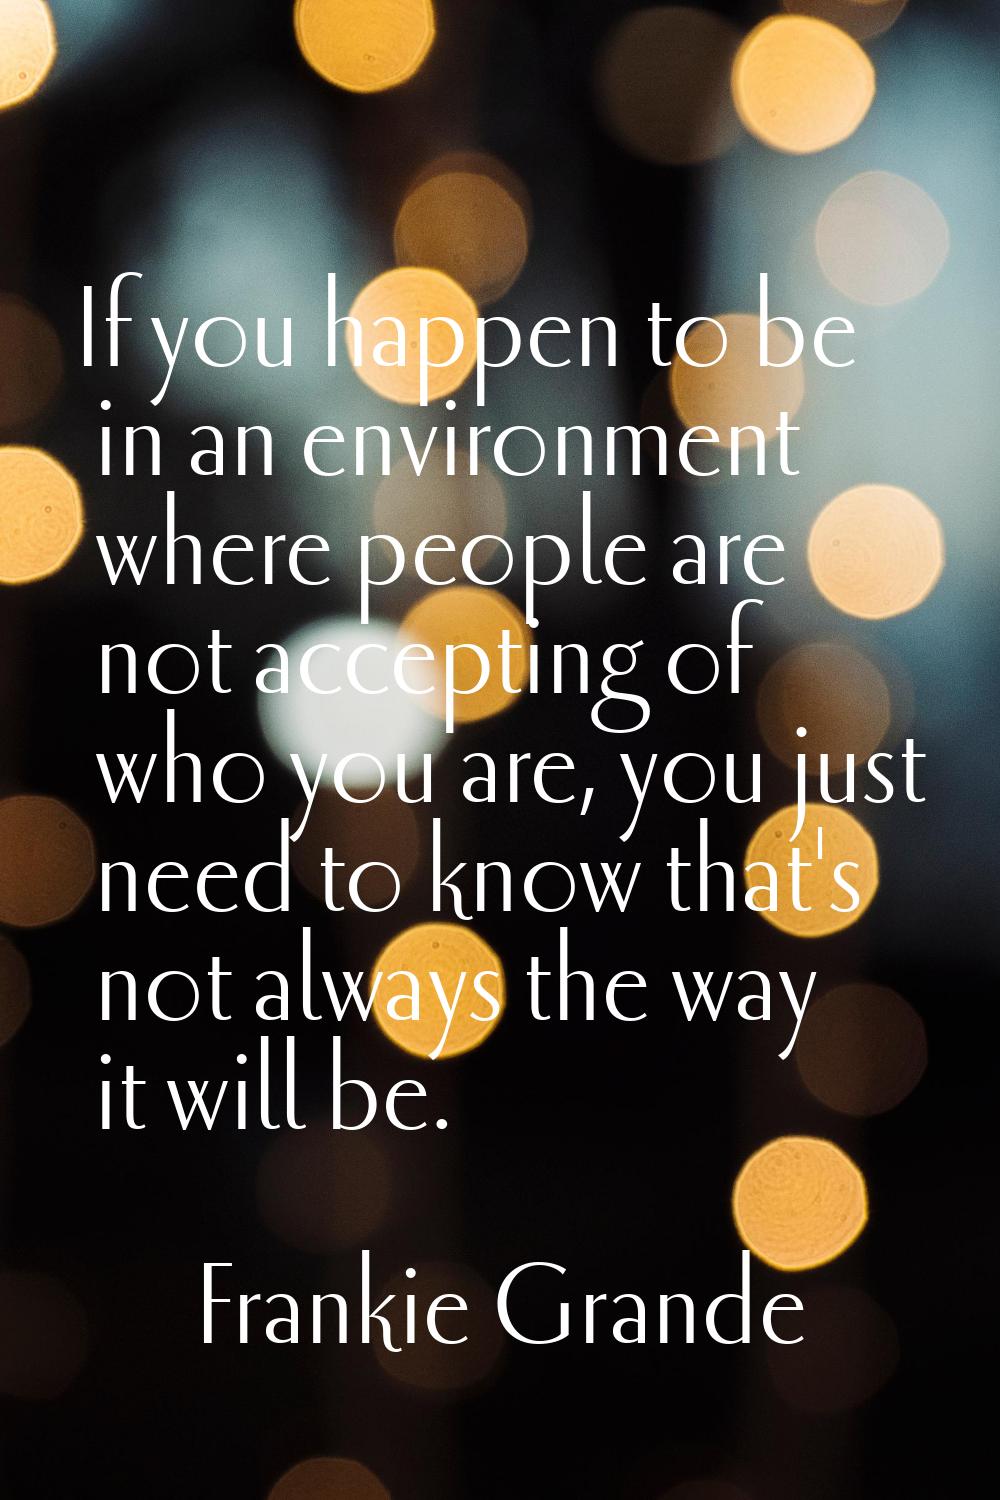 If you happen to be in an environment where people are not accepting of who you are, you just need 